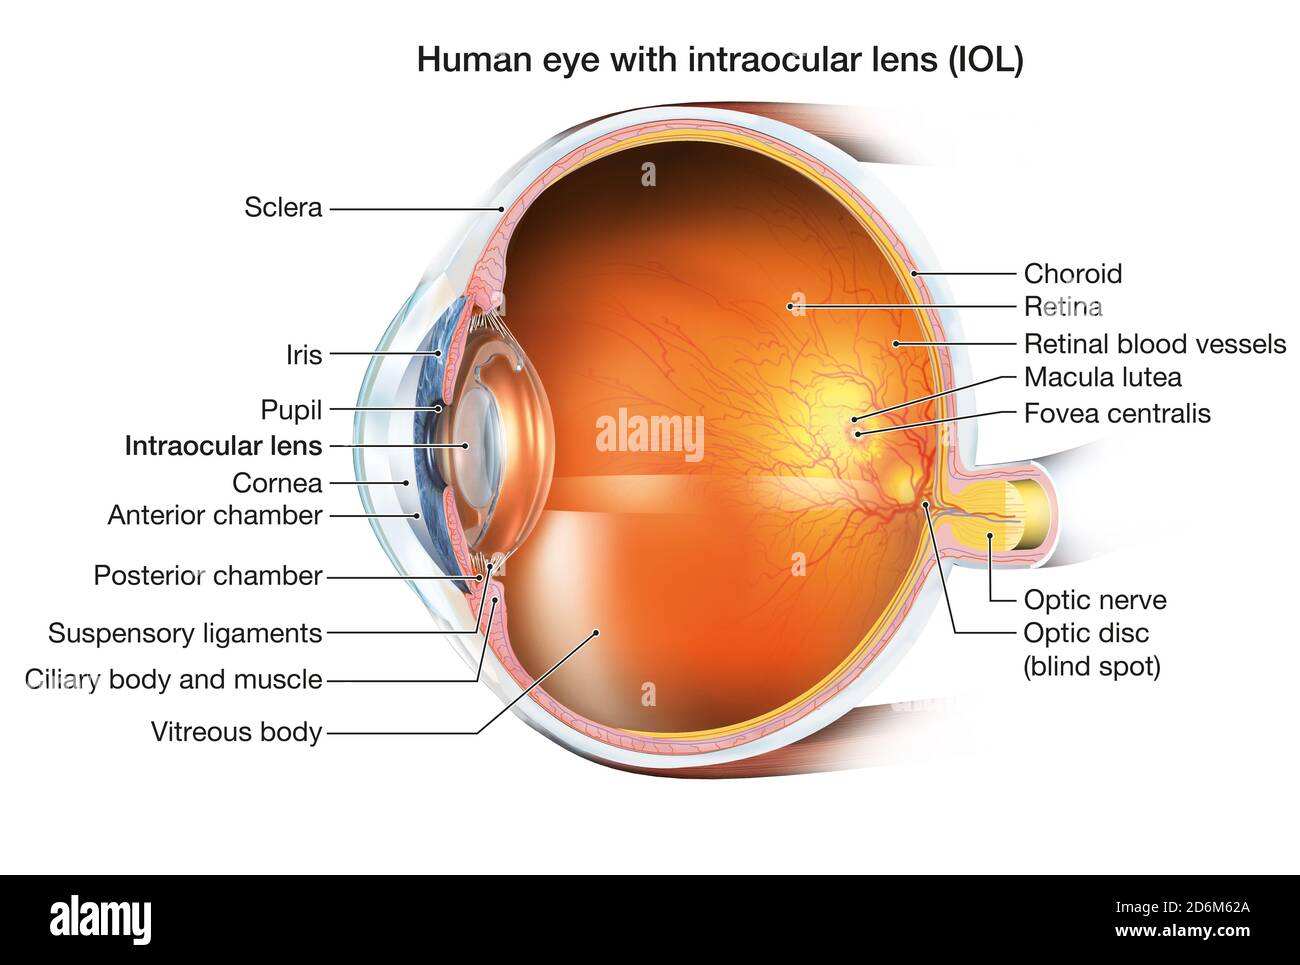 Medically 3D illustration showing human eye with intraocular lens (IOL), retina, pupil, iris, anterior chamber, posterior chamber, ciliary body, eye b Stock Photo